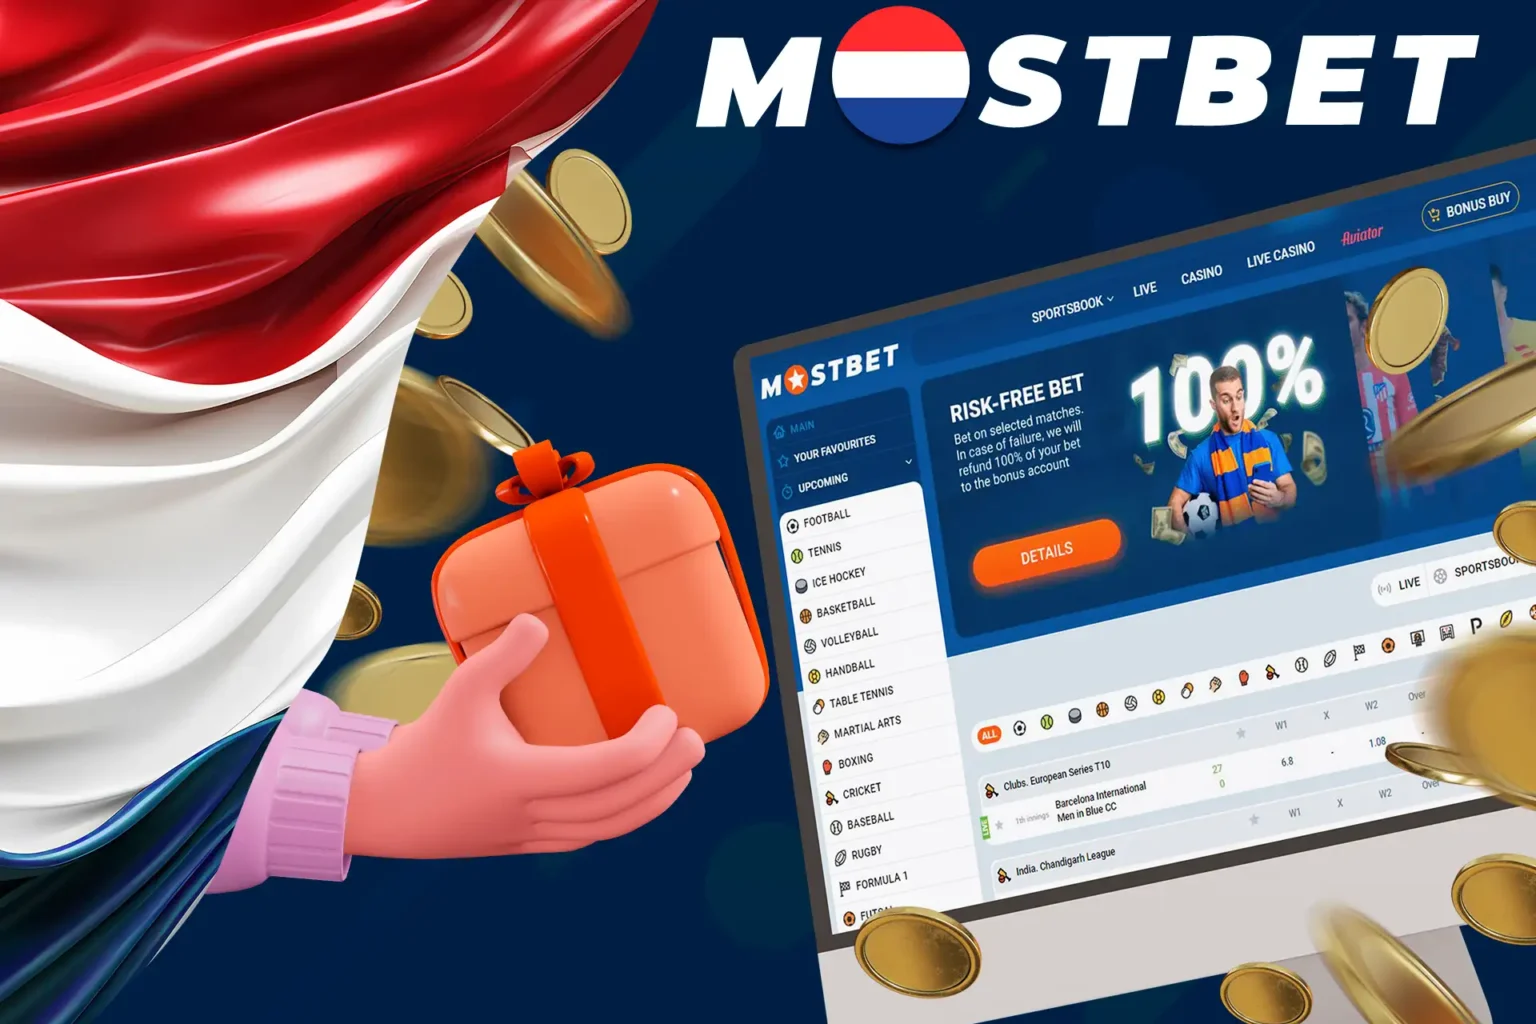 The Mostbet BD-2 Betting Company and Online Casino in Bangladesh Mystery Revealed